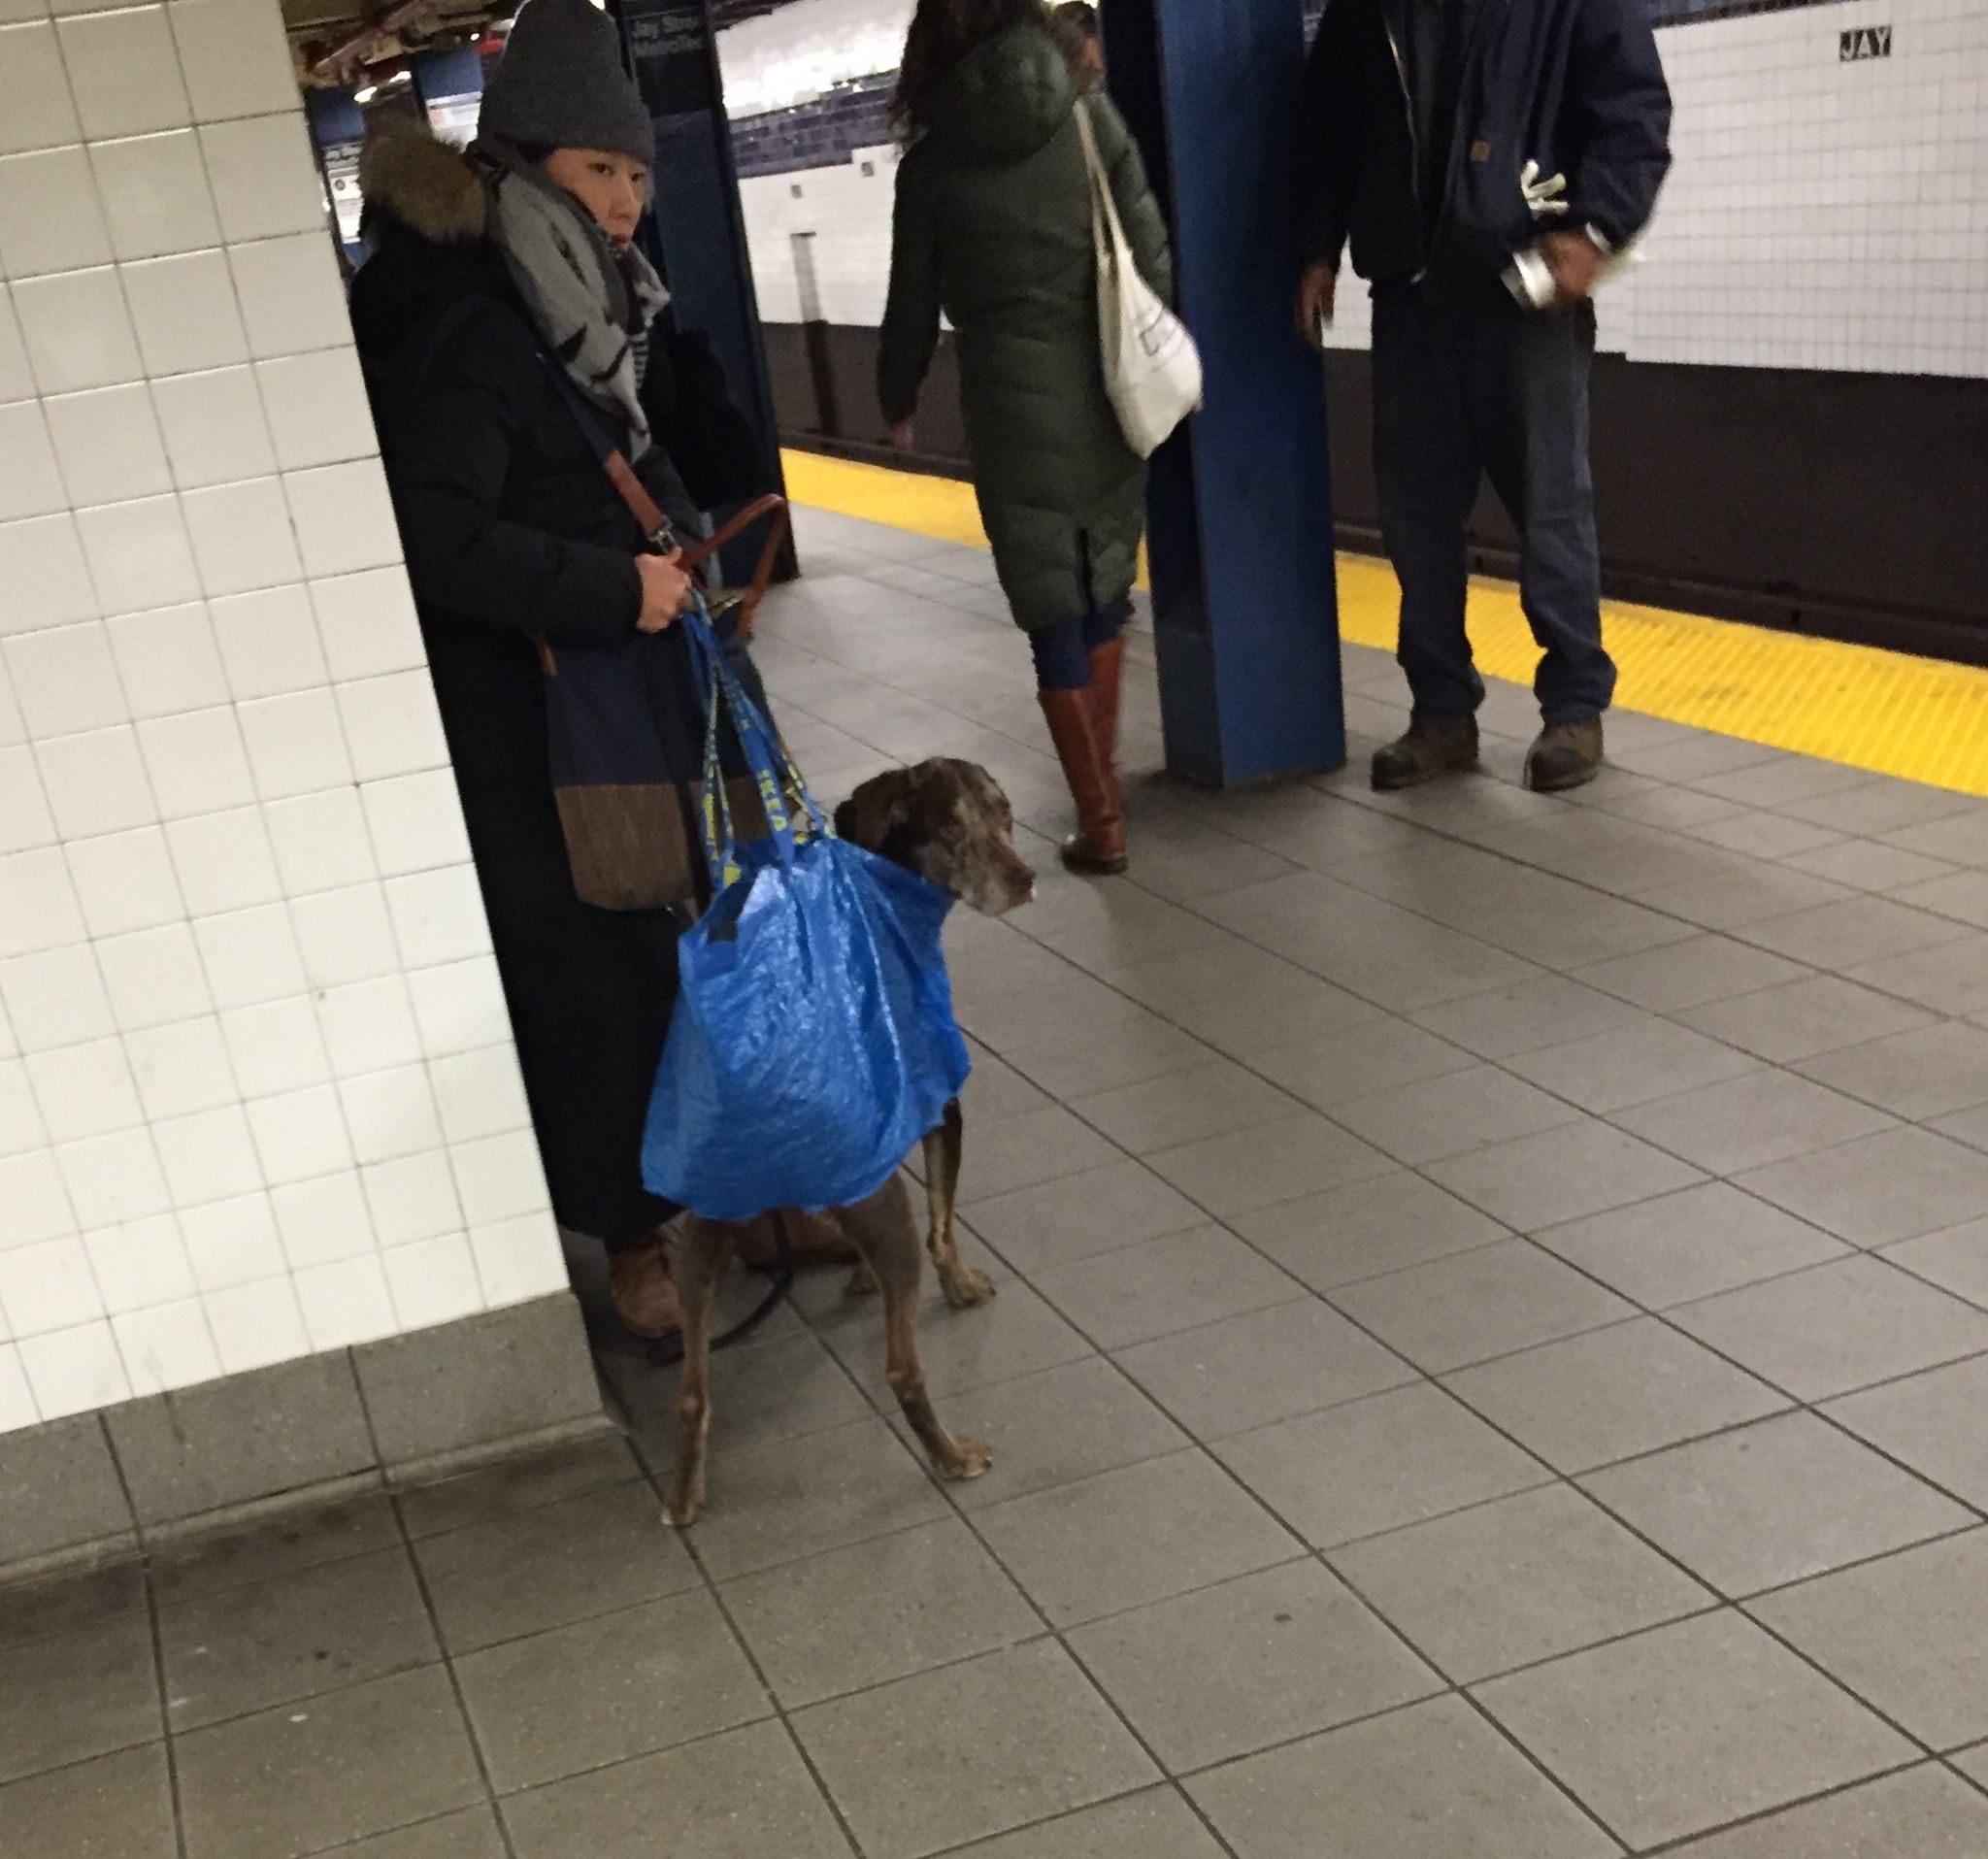 So NYC MTA banned all dogs unless the owner carries them in a bag. I think this owner nailed it.